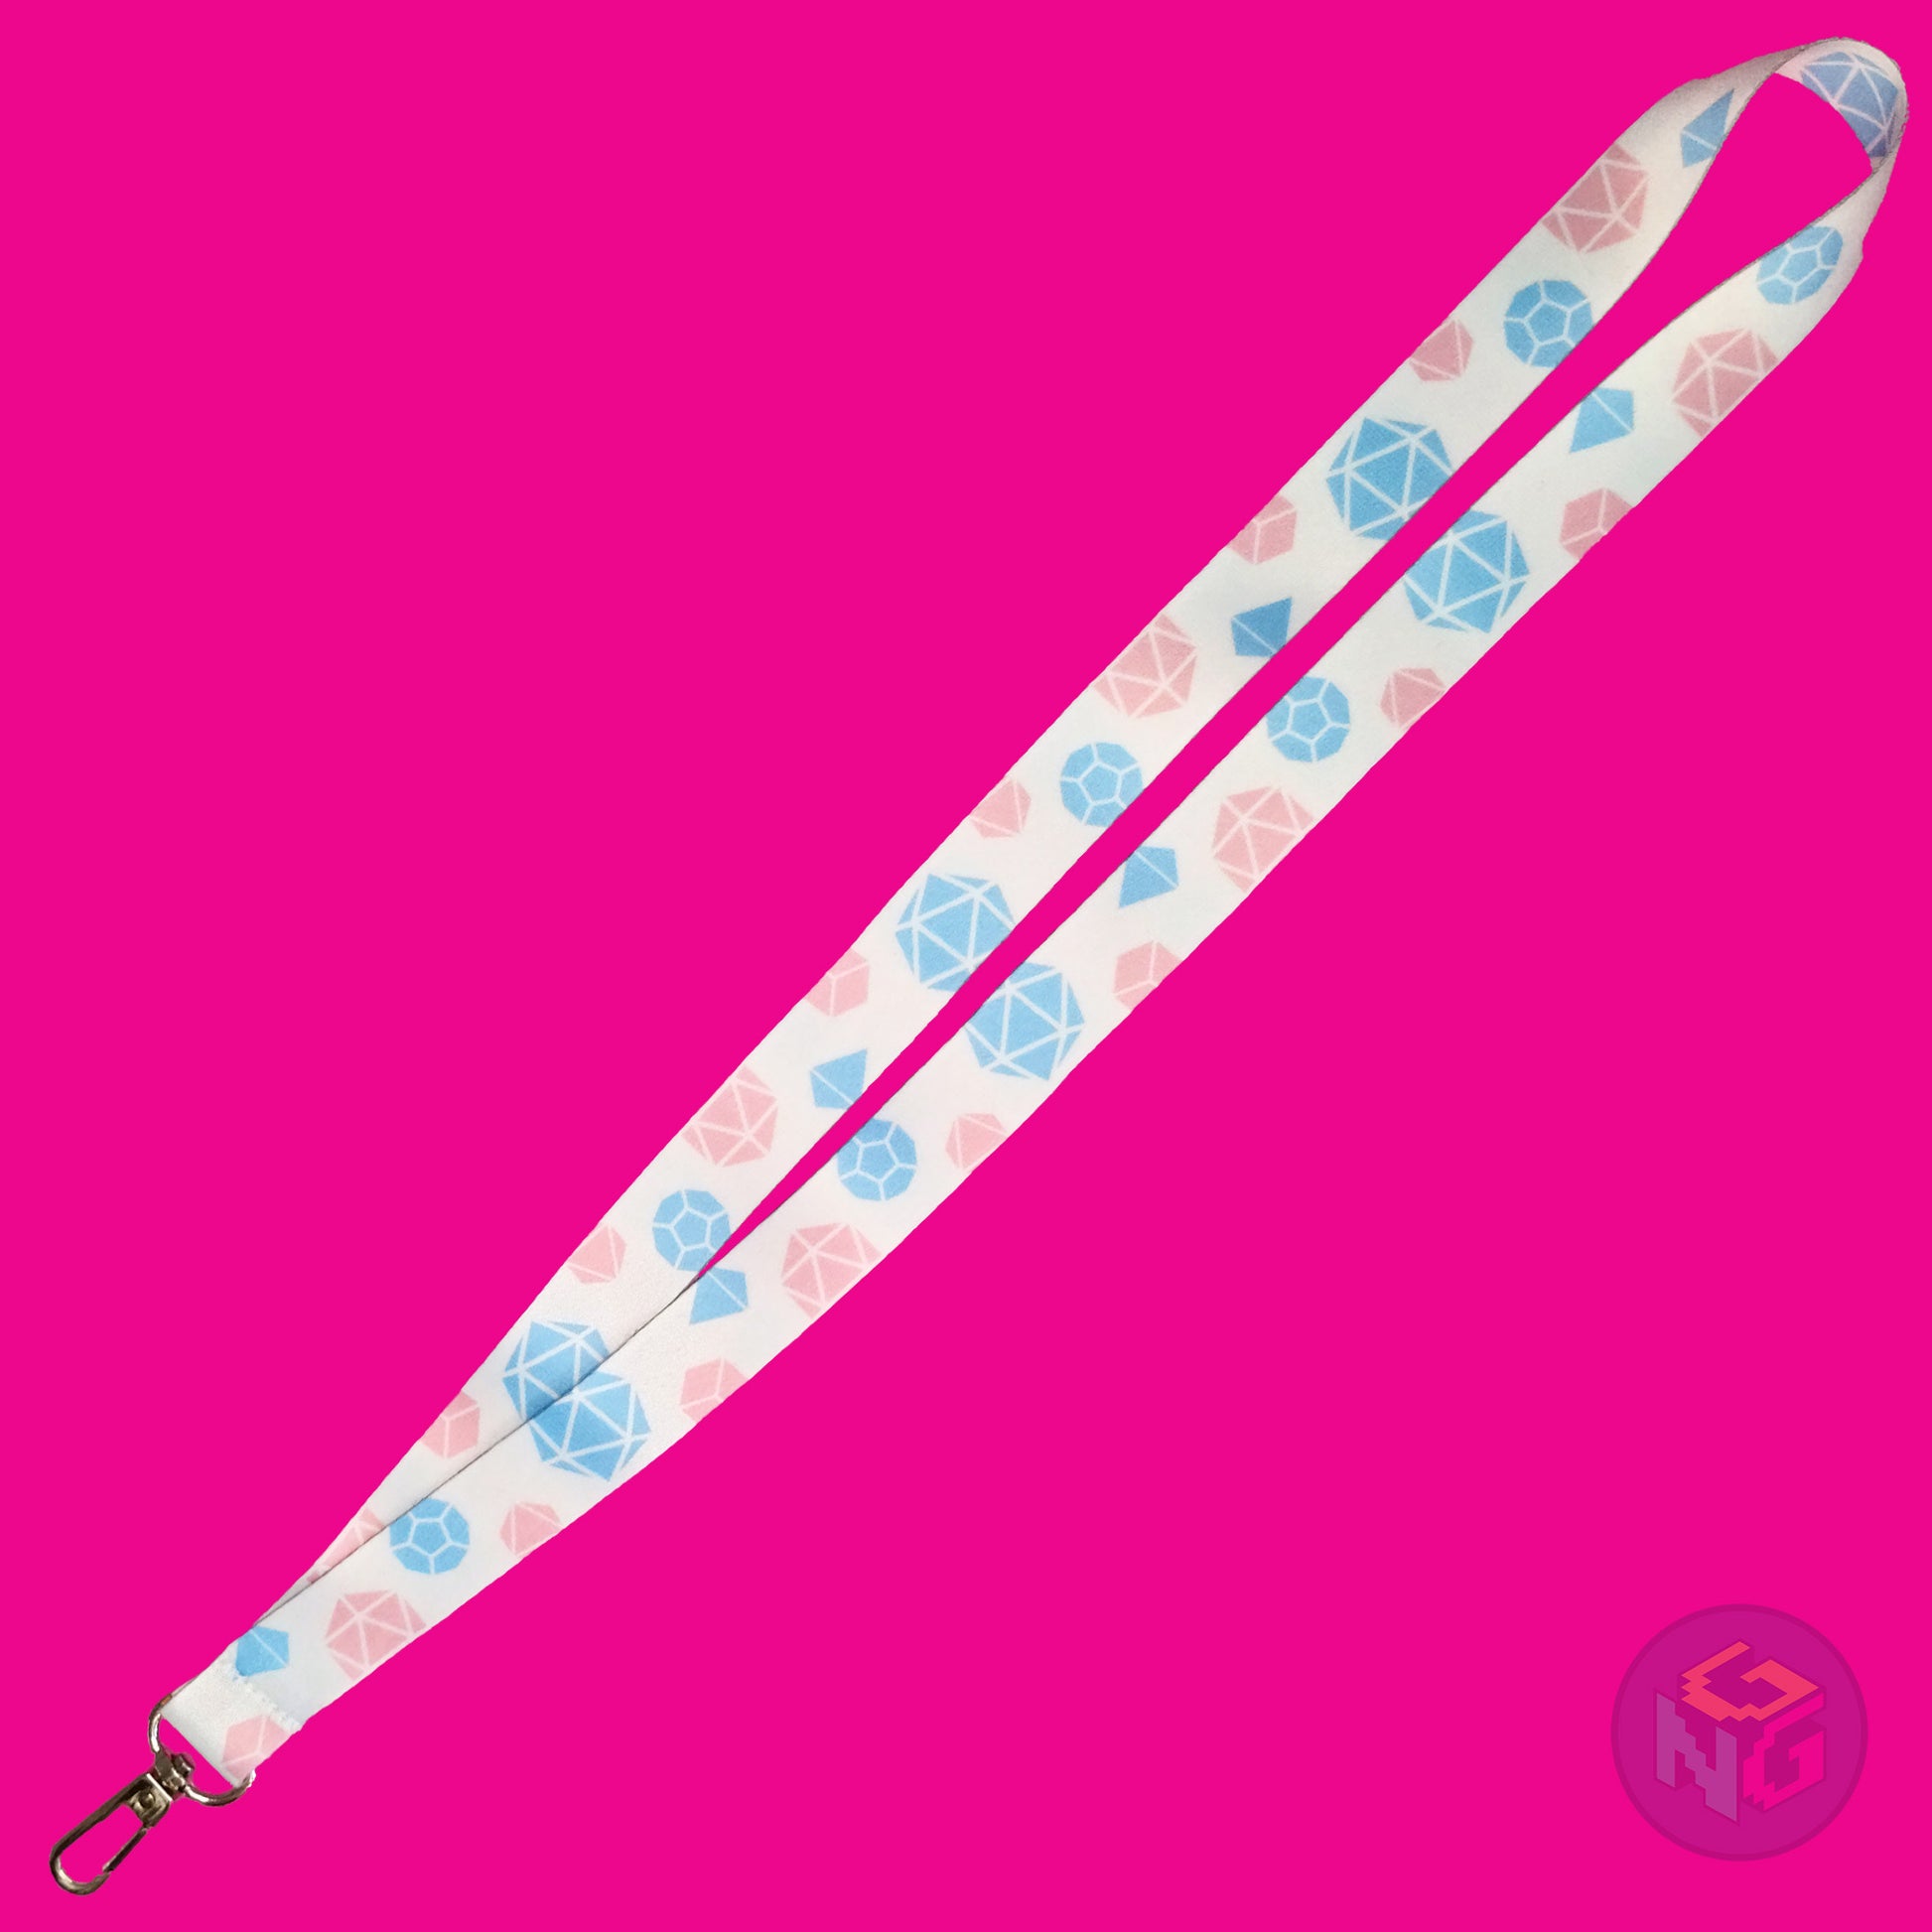 the transgender pride dice lanyard lying flat showing the complete design and repeating pattern of polyhedral dice in transgender colors